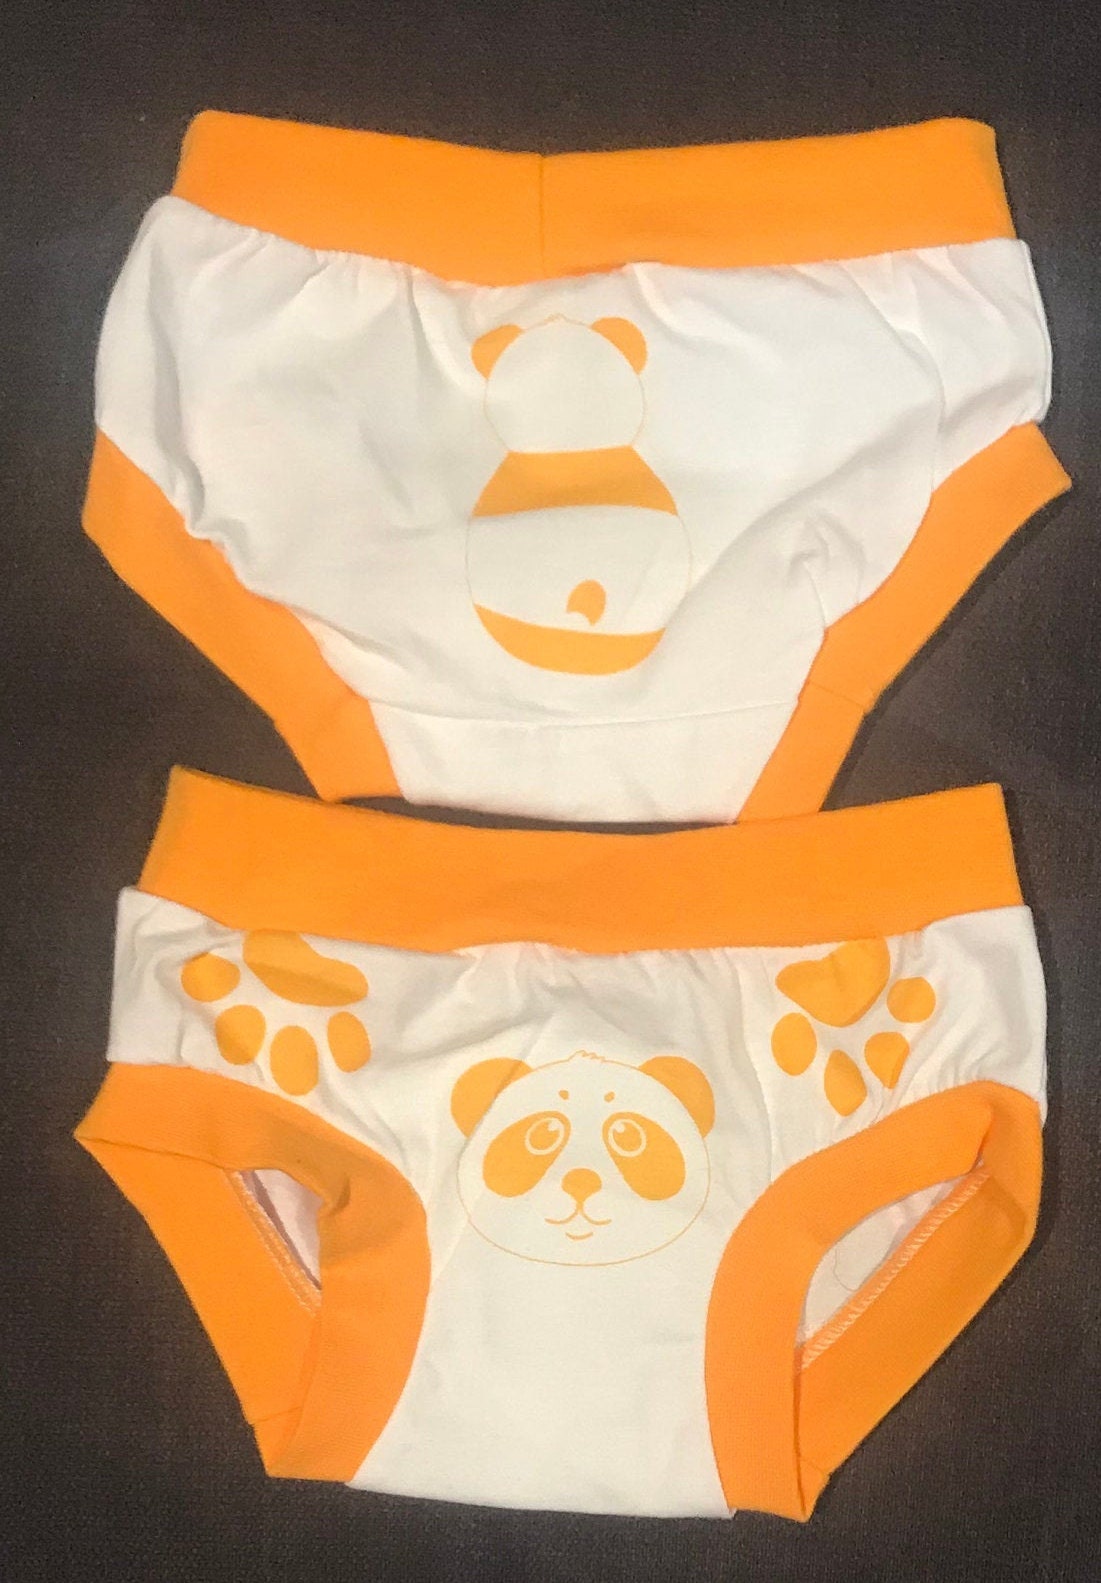 Toddler Training Pink Cat Underwear/ Unisex Comfy Cotton Underwear Paws Show  Kids Where to Hold Animal Face and Tail Show Back and Front. -  Canada